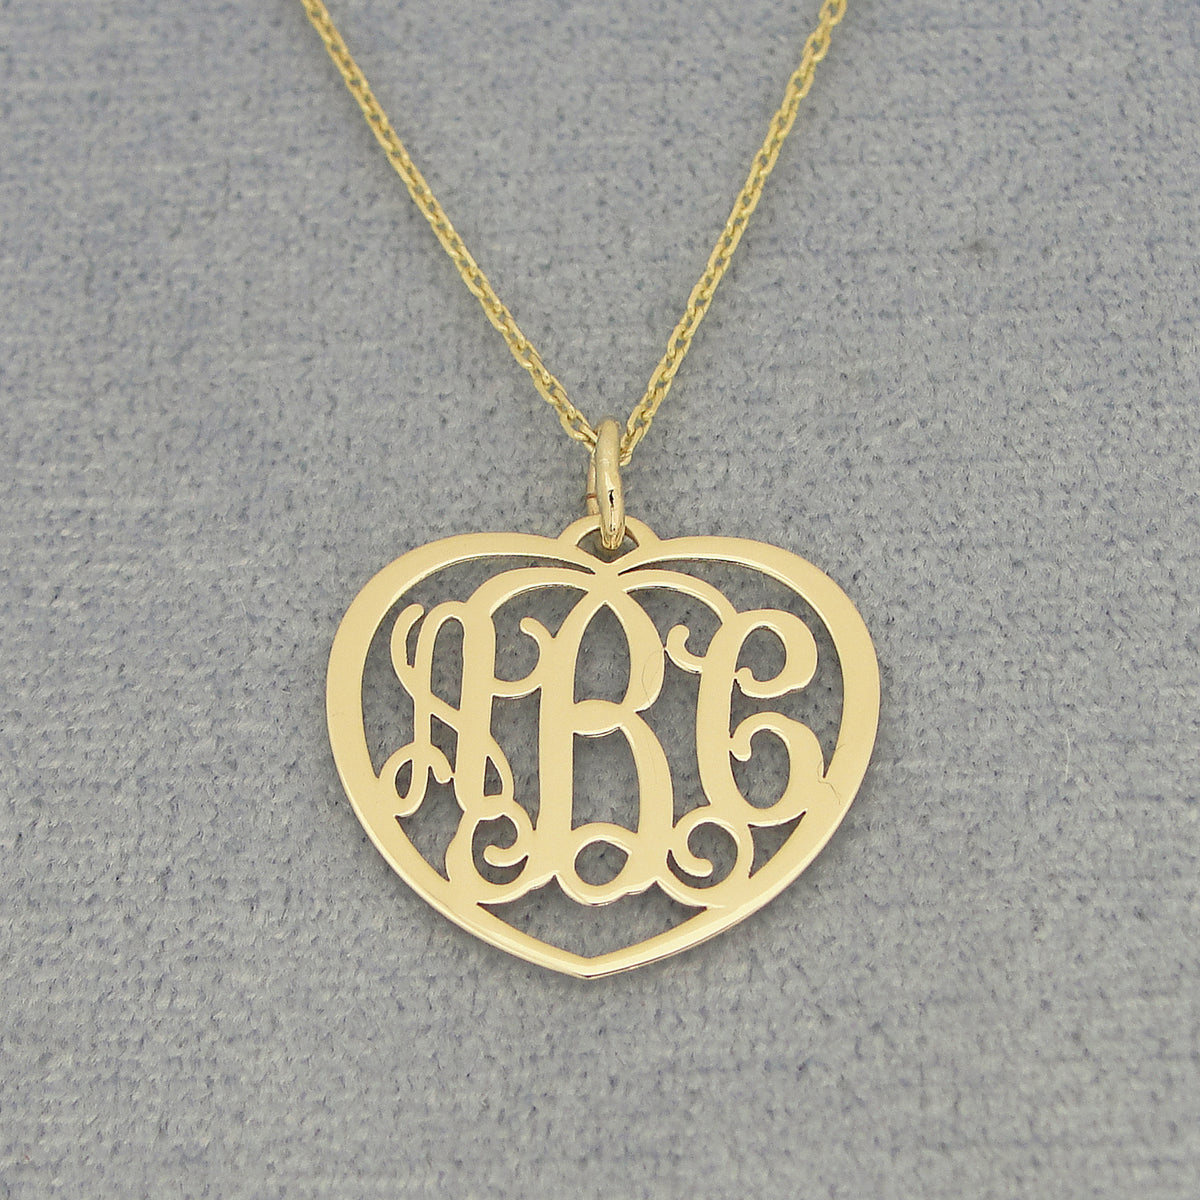 Small 10k or 14k Gold 3 Initials Heart Monogram Pendant Charm 0.75 Inch Wide Fine Jewelry GM51